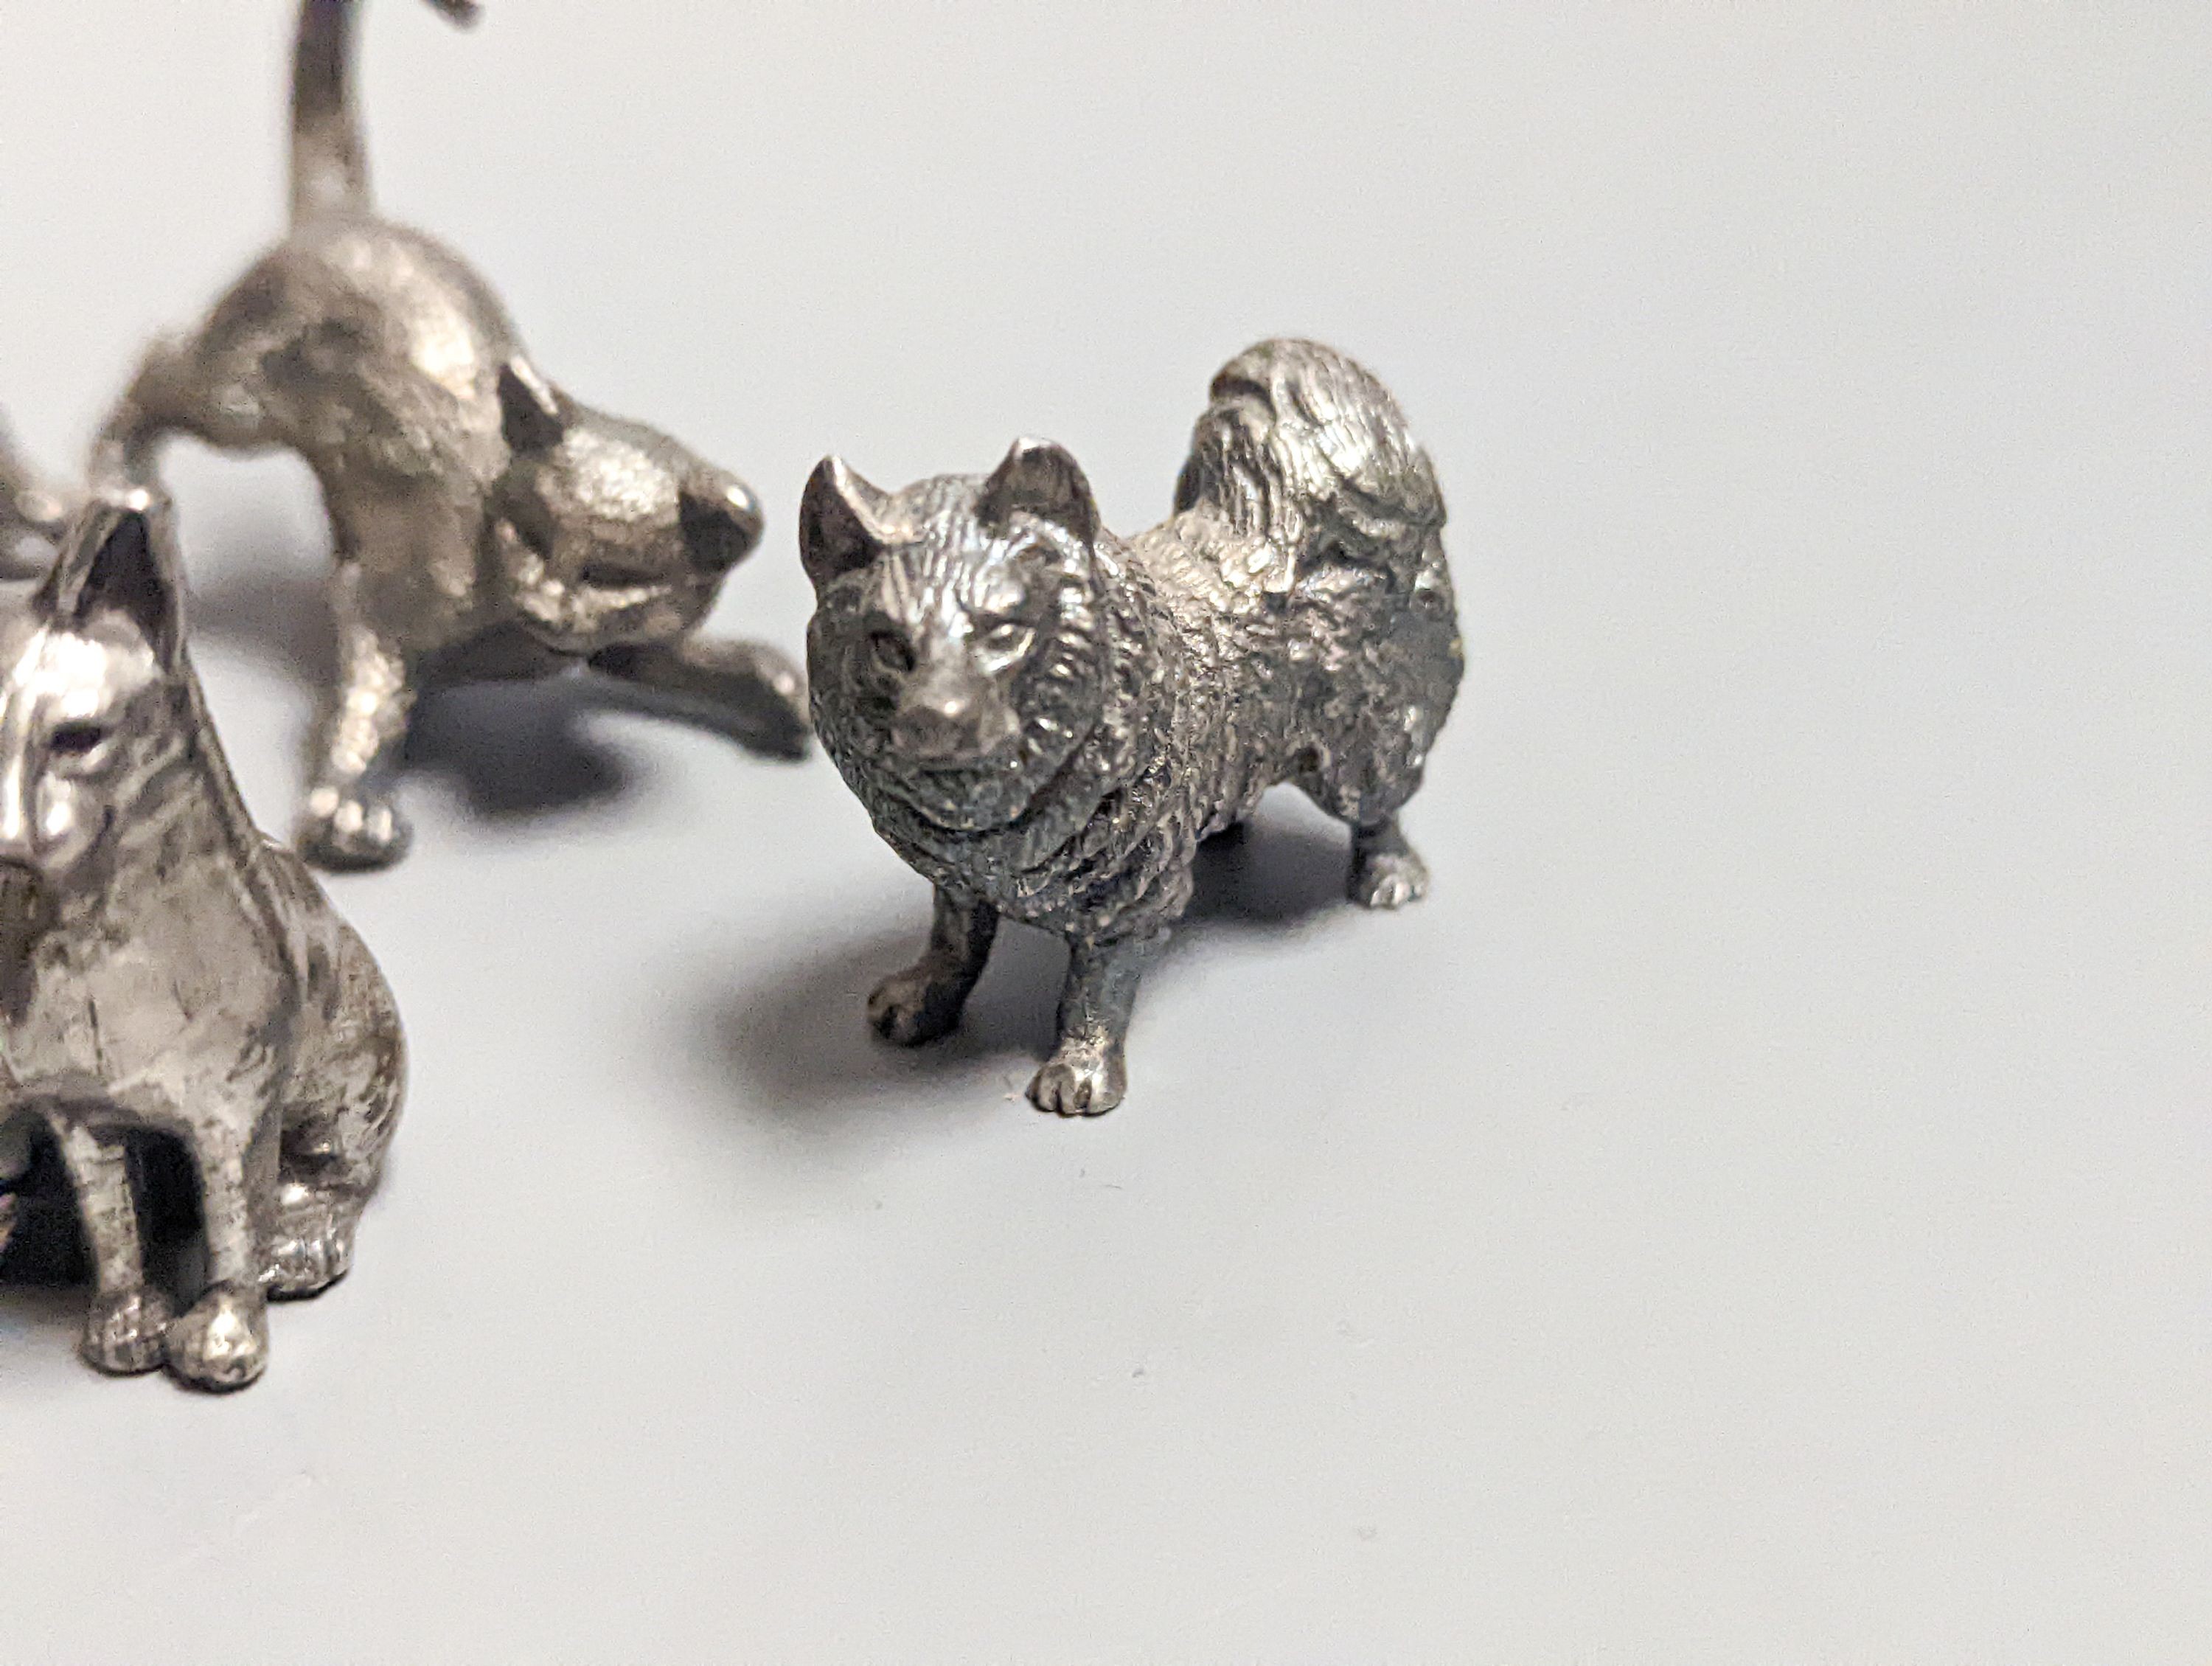 Four modern miniature freestanding model animals, including, badger, two dogs and a cat, JJSM, London, 1989 &1991, cat length 37mm, two Italian 925 models and two base metal models.